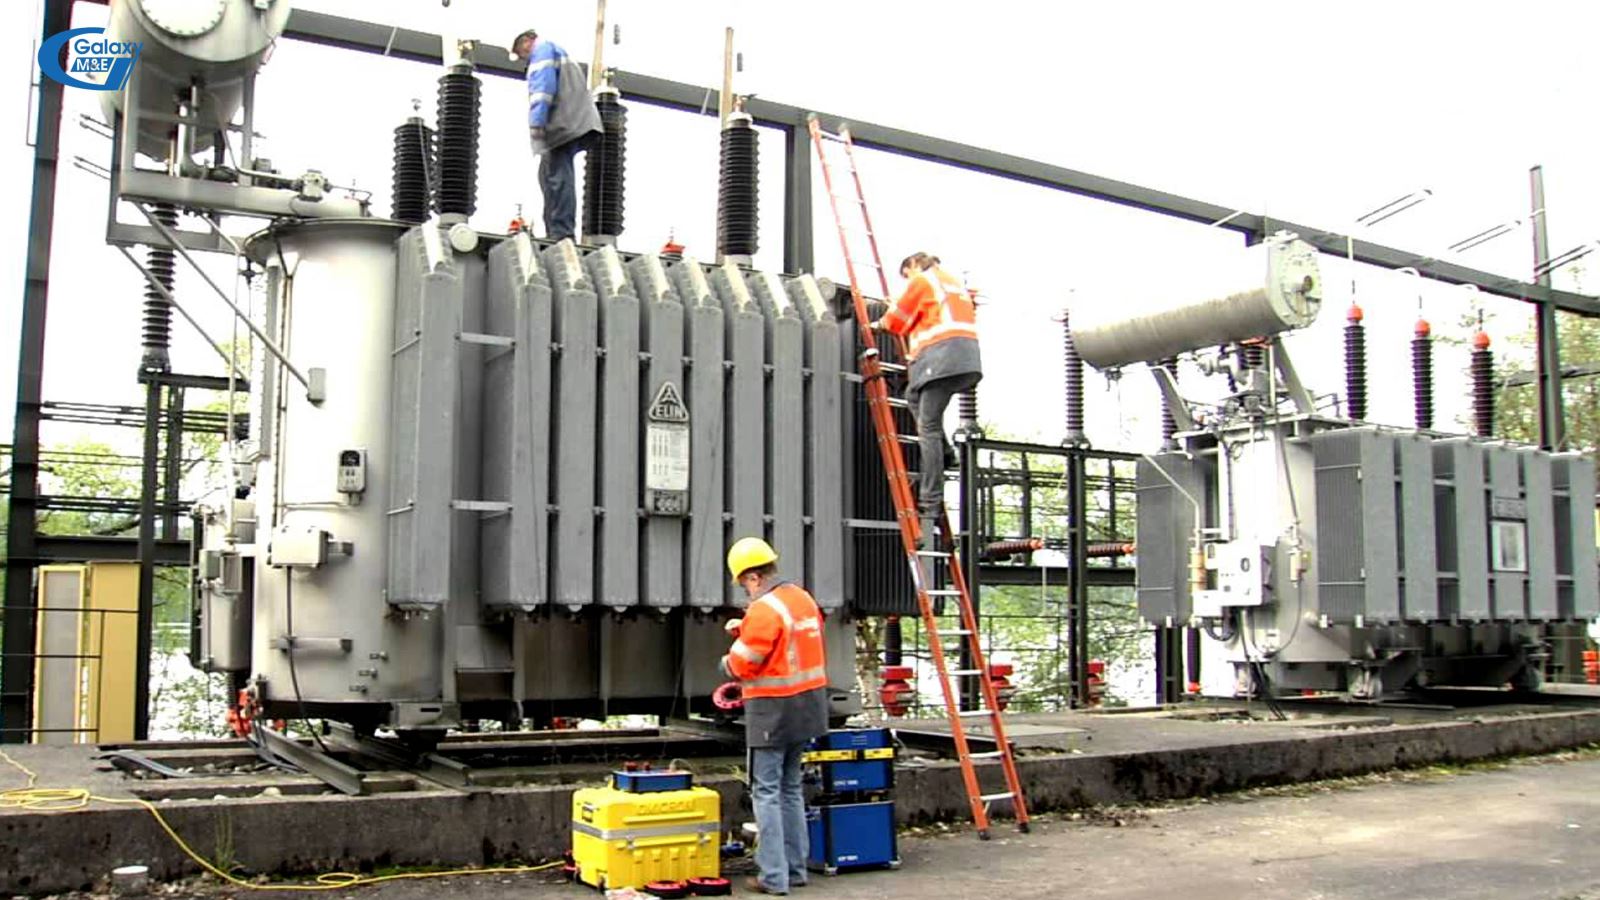 It is necessary to strictly follow the inspection process of transformers, lines and load devices.